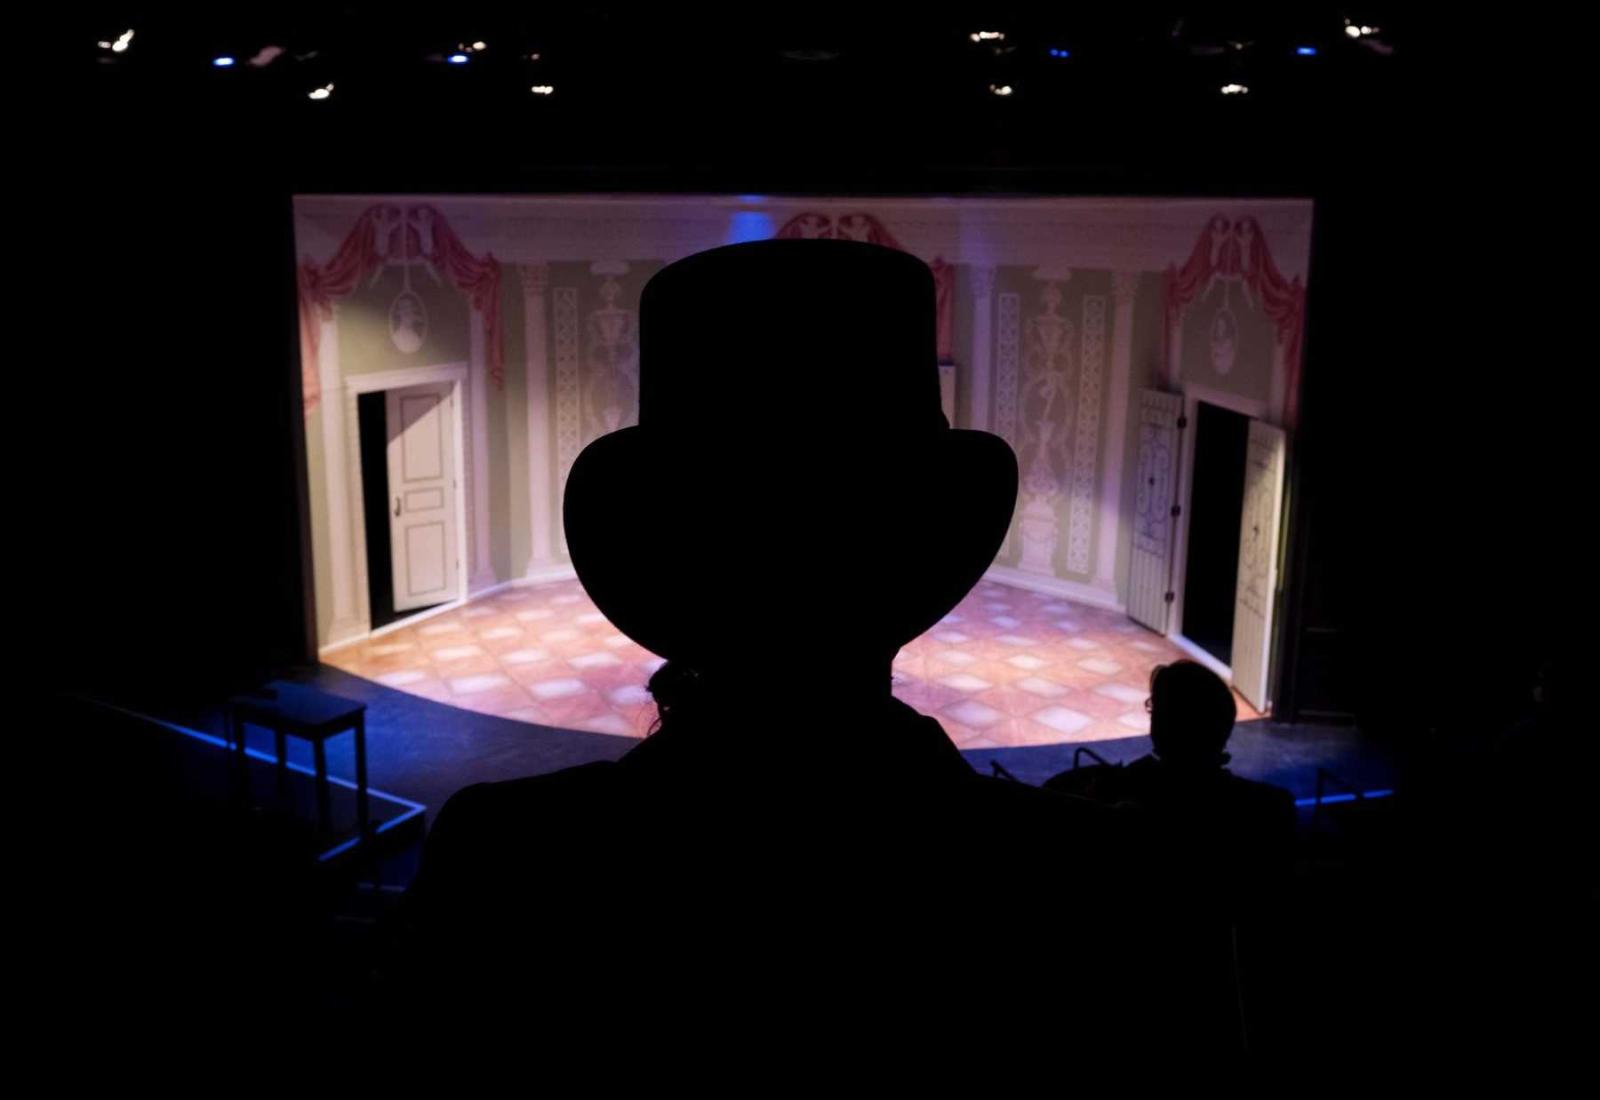 A cast member in costume is silhouetted from behind against the stage while watching rehearsal.